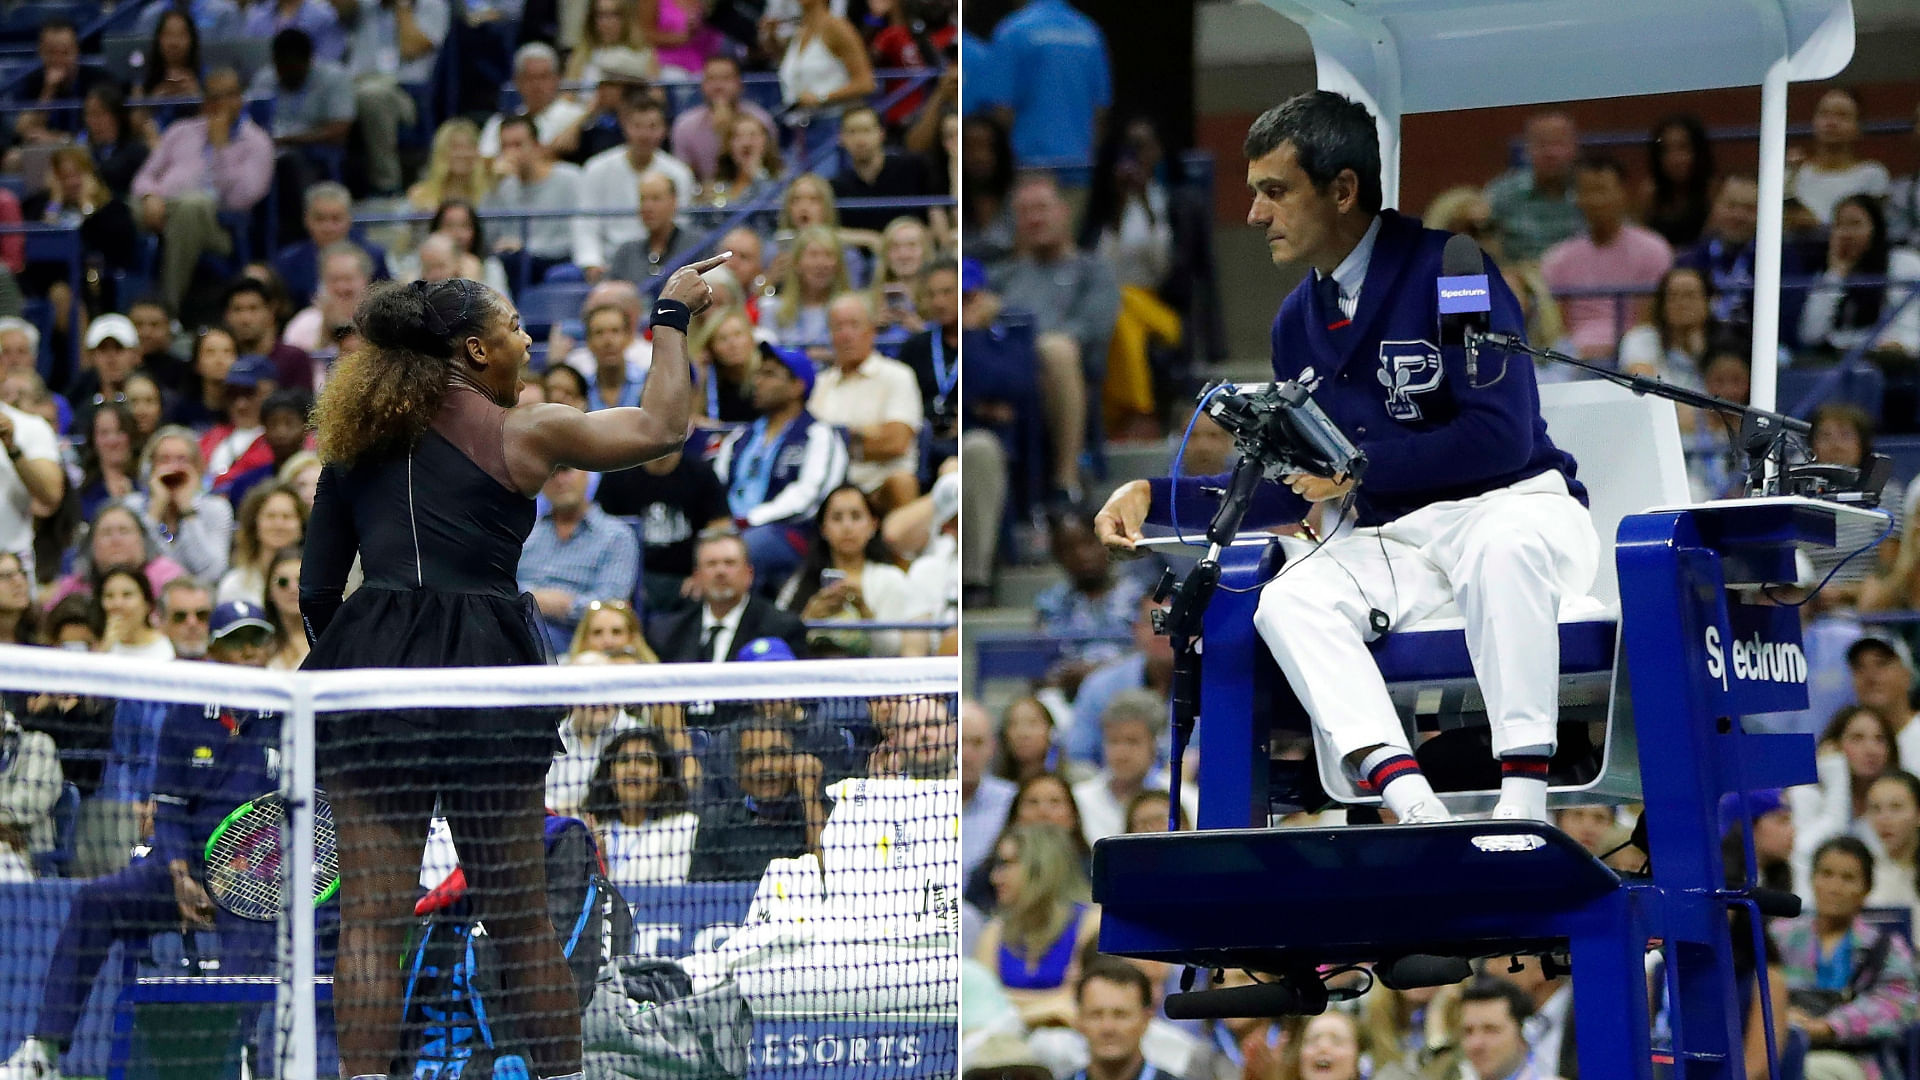 Serena Williams arguing with the umpire Carlos Ramos during the US Open Women’s final against Japan’s Naomi Osaka at the Arthur Ashe Stadium on Saturday.